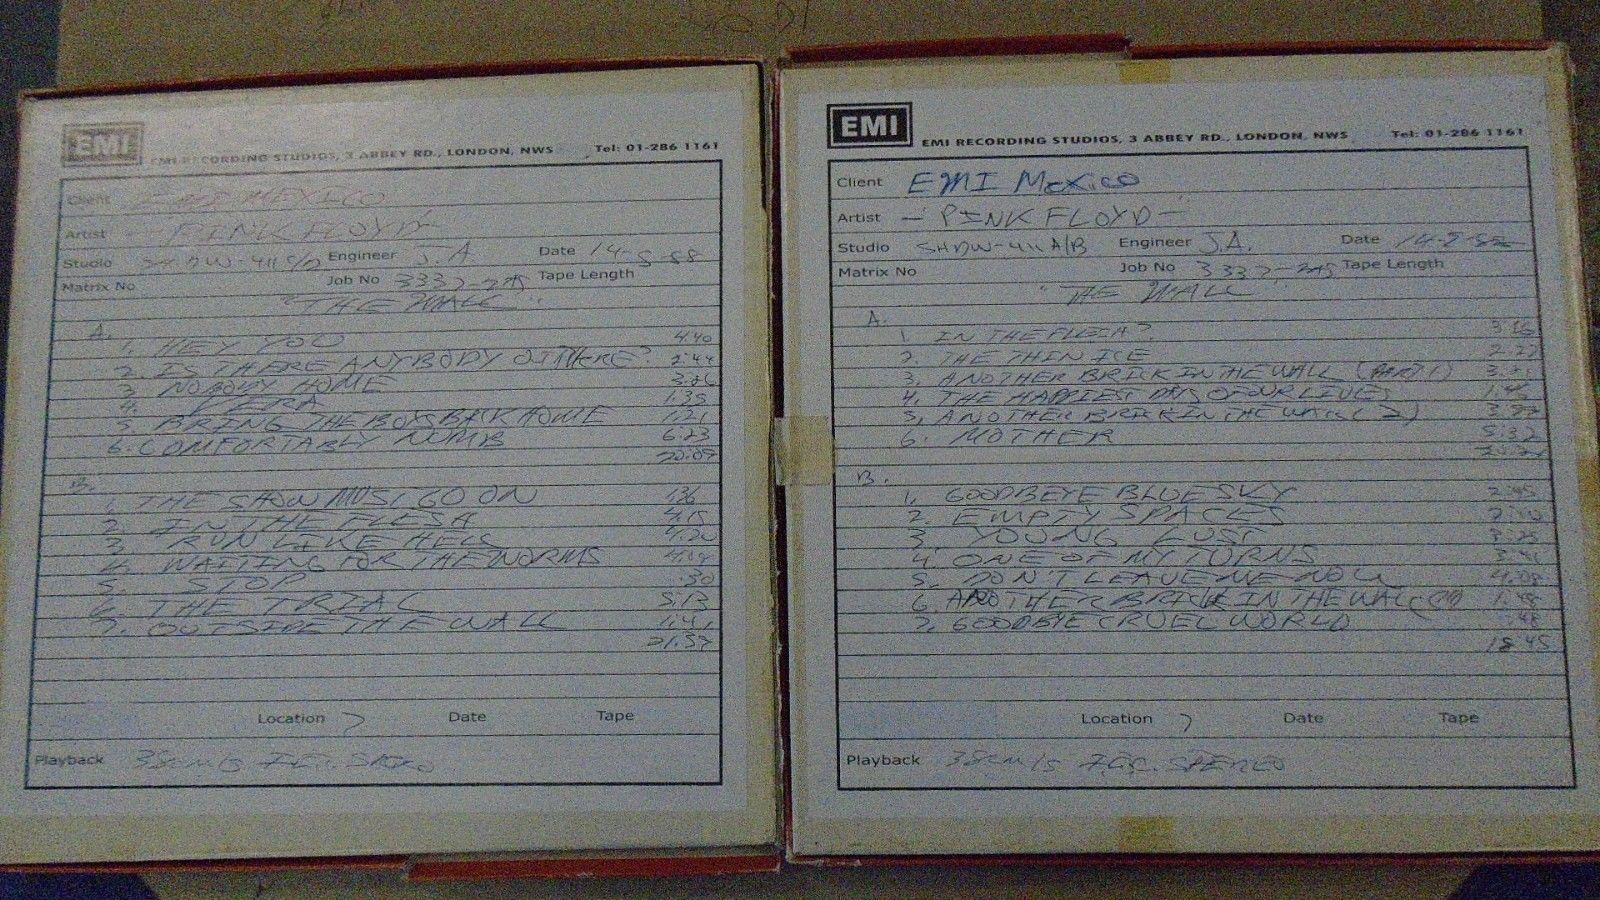 PINK FLOYD THE WALL 15ips 2 TRACK Reel To Reel Record MASTER TAPE